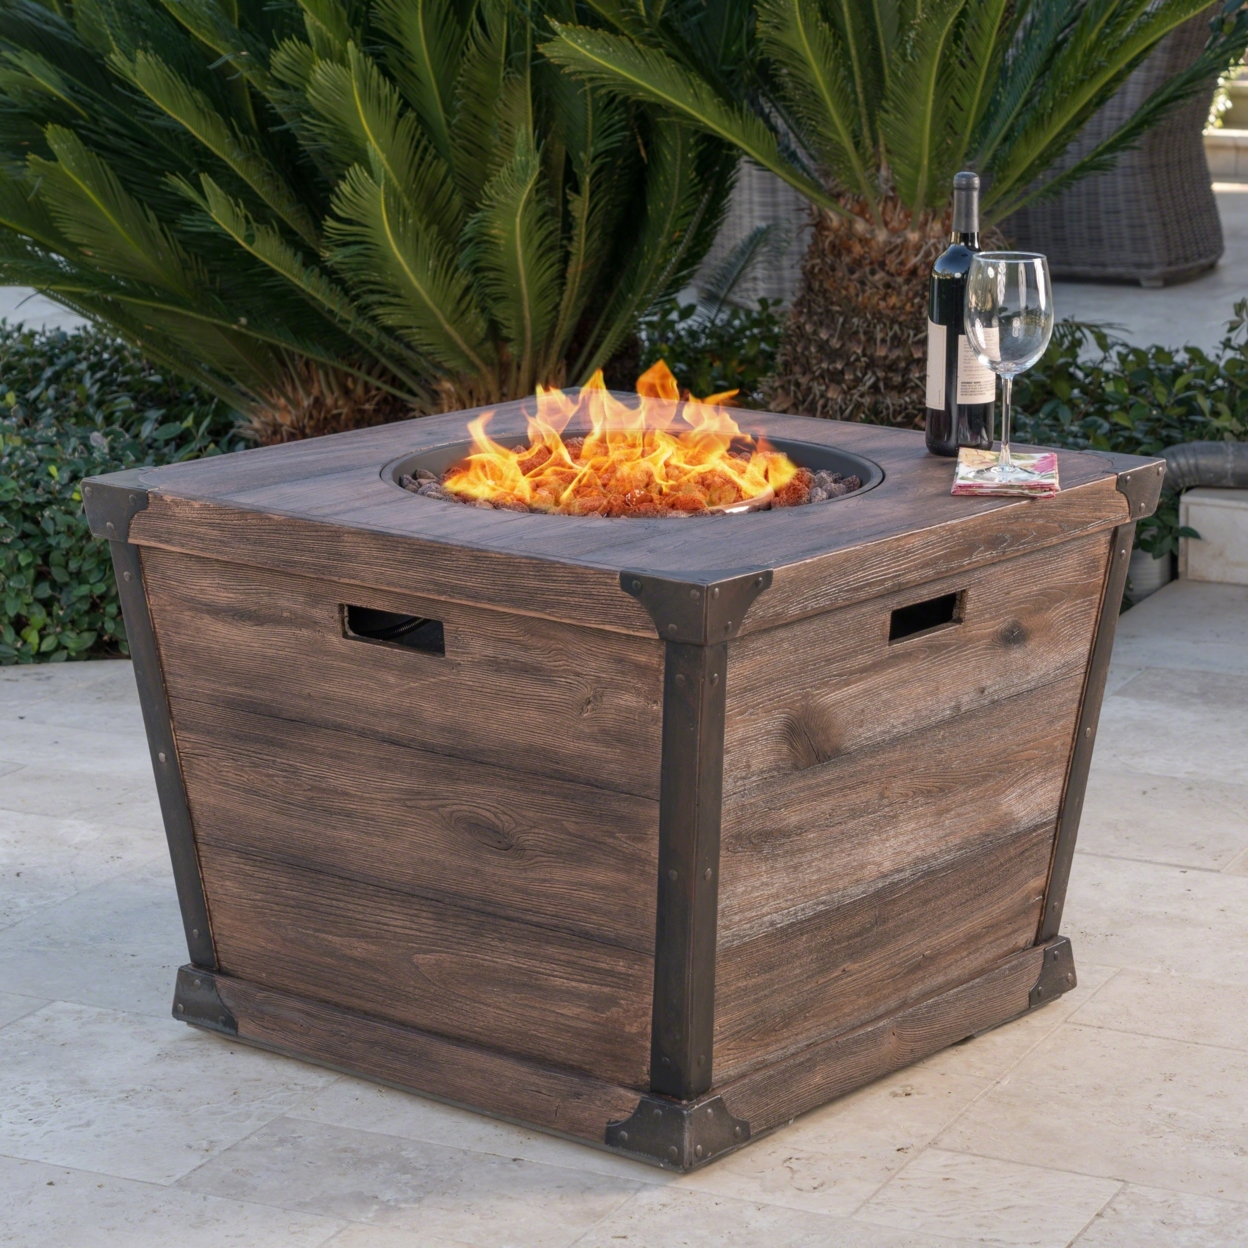 Madge Outdoor Brown 32 Inch Square Fire Pit - 40,000 BTU